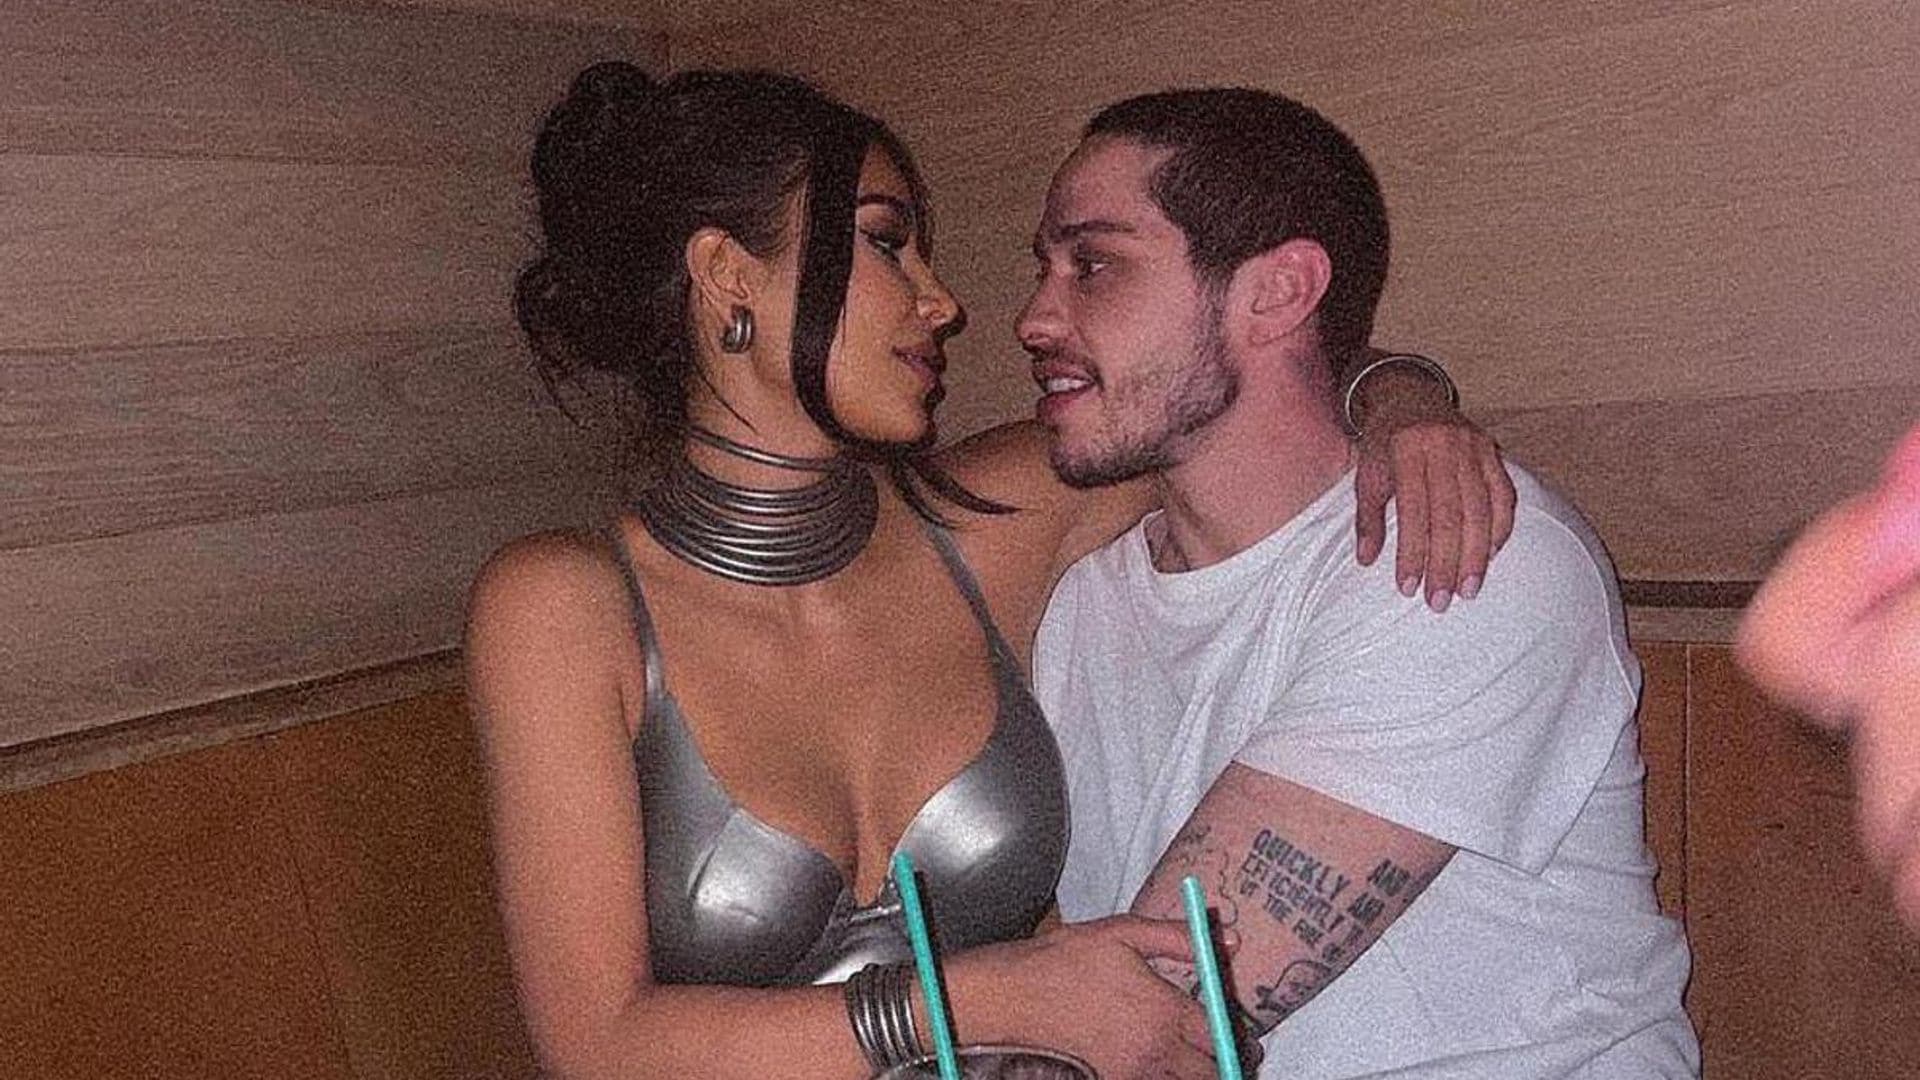 Kim Kardashian and Pete Davidson are not entirely done